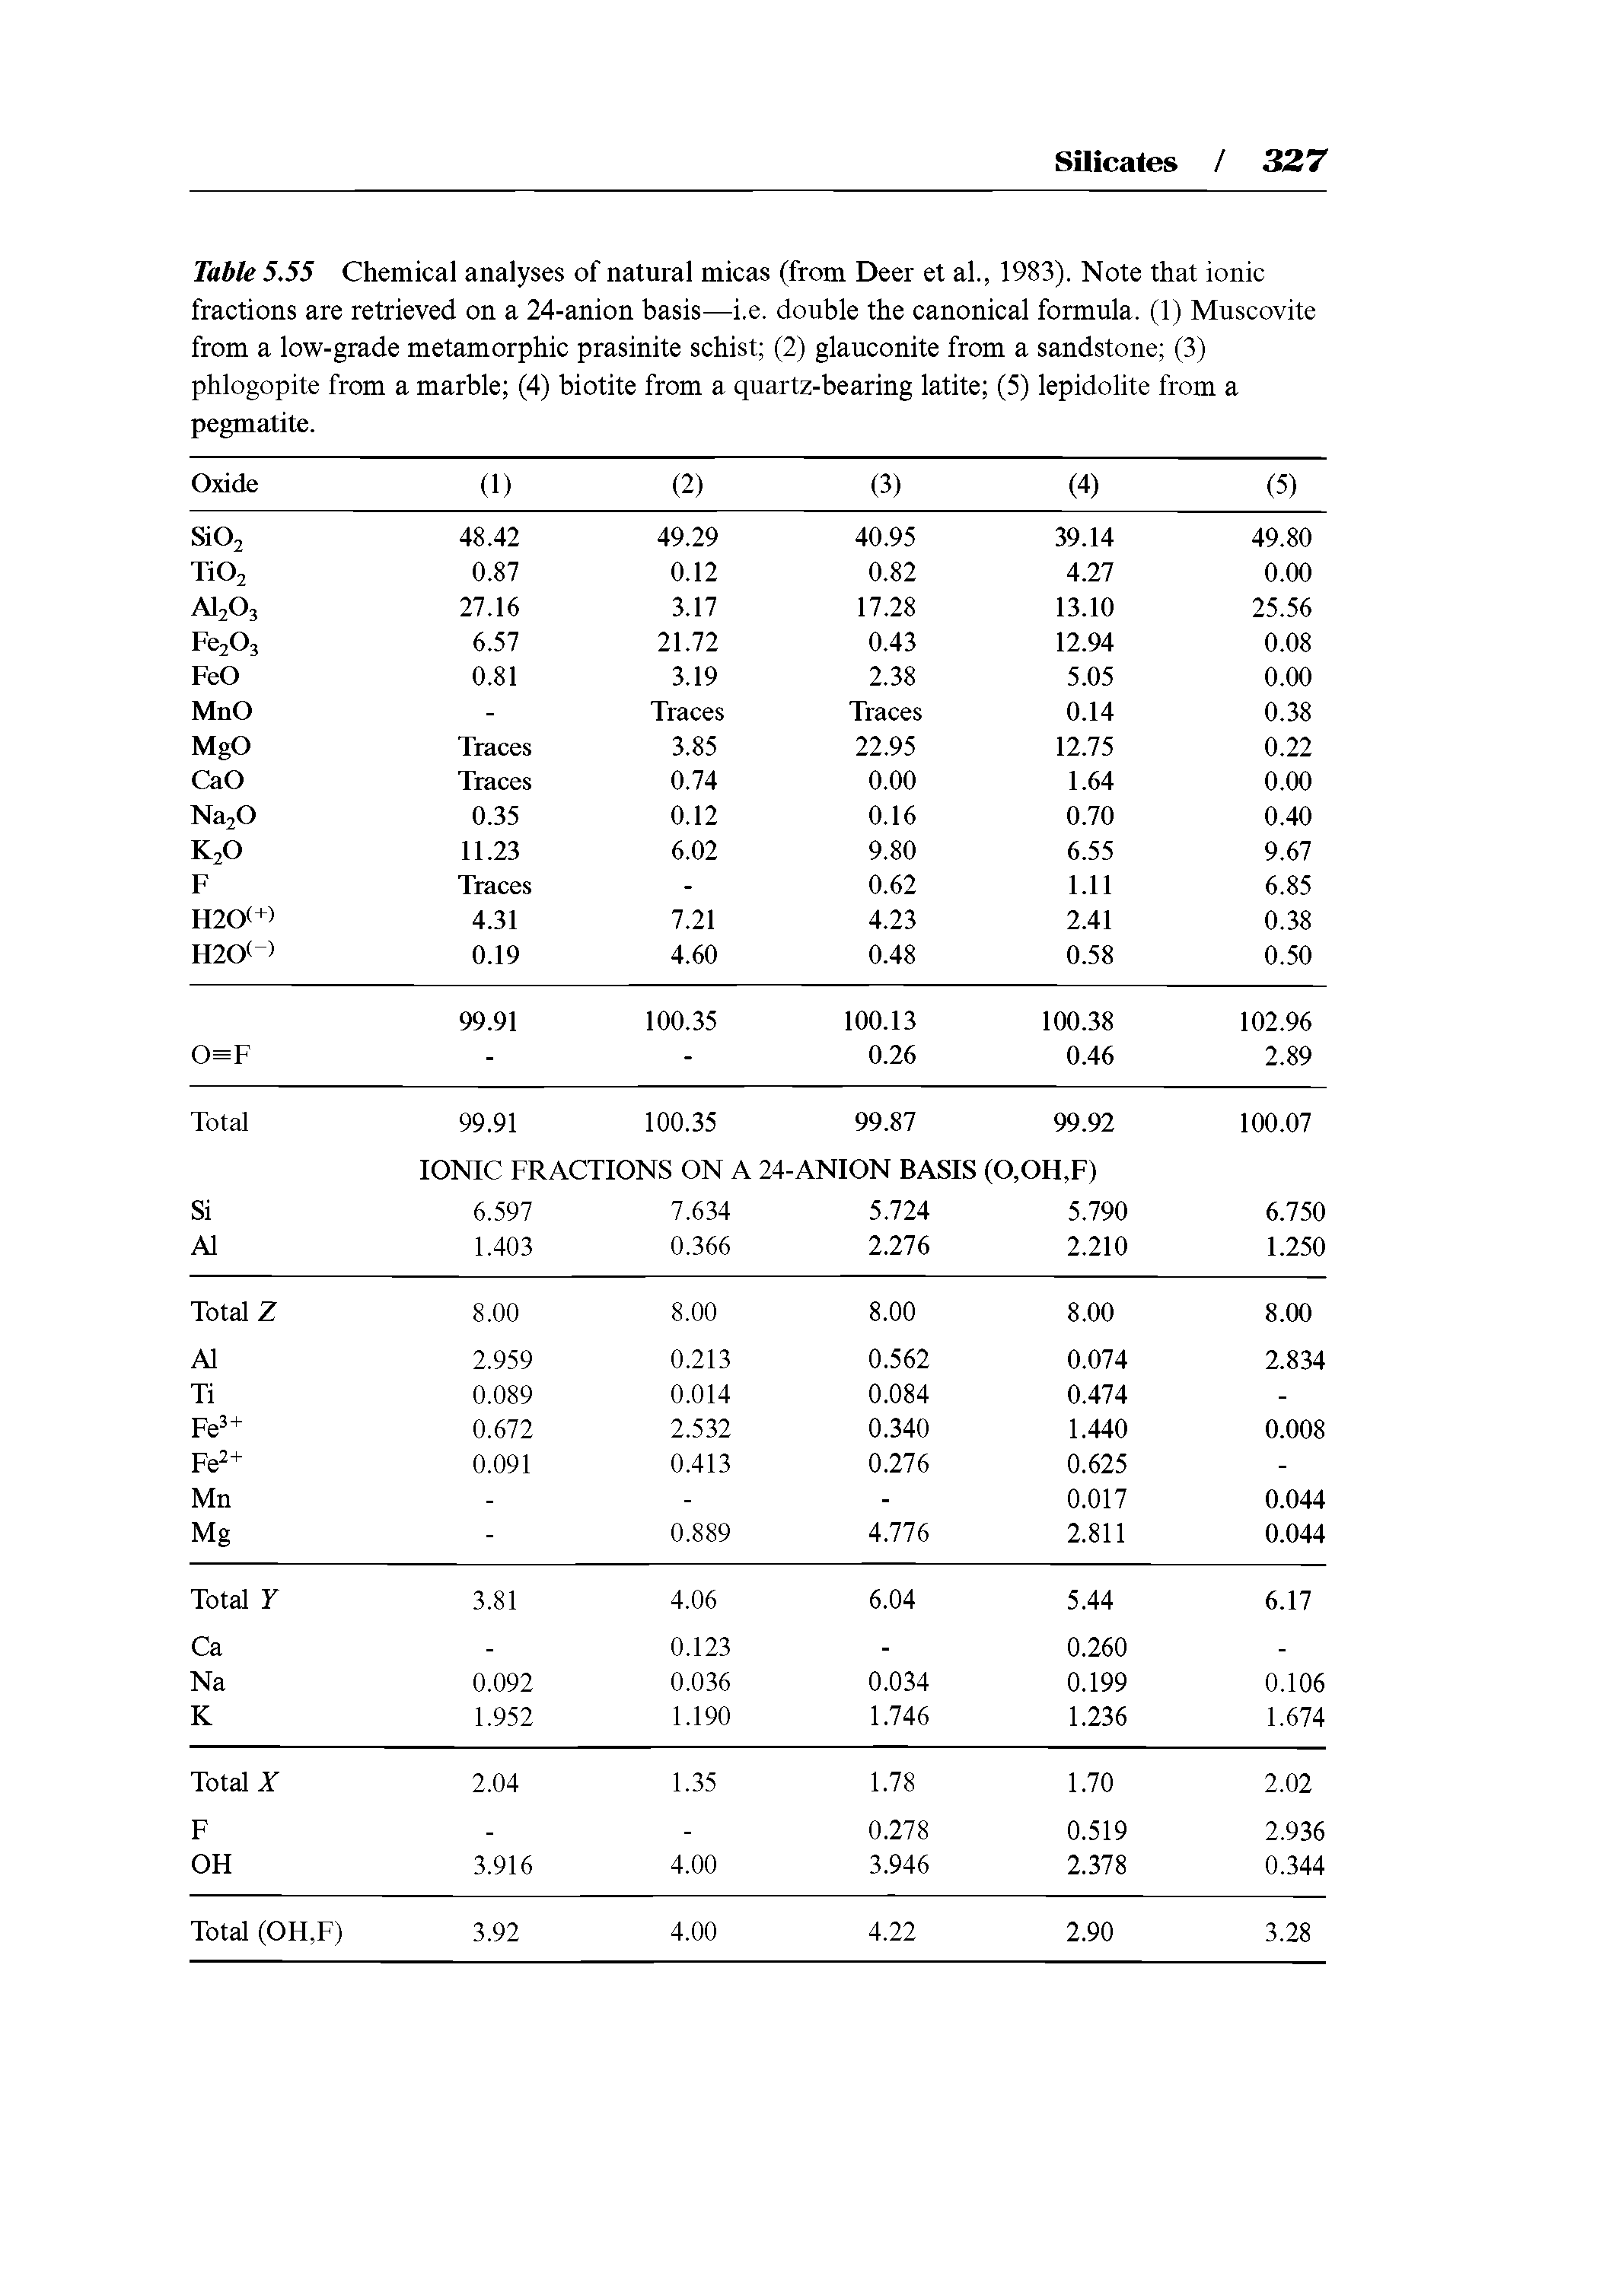 Table 5.55 Chemical analyses of natural micas (from Deer et al., 1983). Note that ionic fractions are retrieved on a 24-anion basis—i.e. double the canonical formula. (1) Muscovite from a low-grade metamorphic prasinite schist (2) glauconite from a sandstone (3) phlogopite from a marble (4) biotite from a quartz-bearing latite (5) lepidolite from a pegmatite. ...